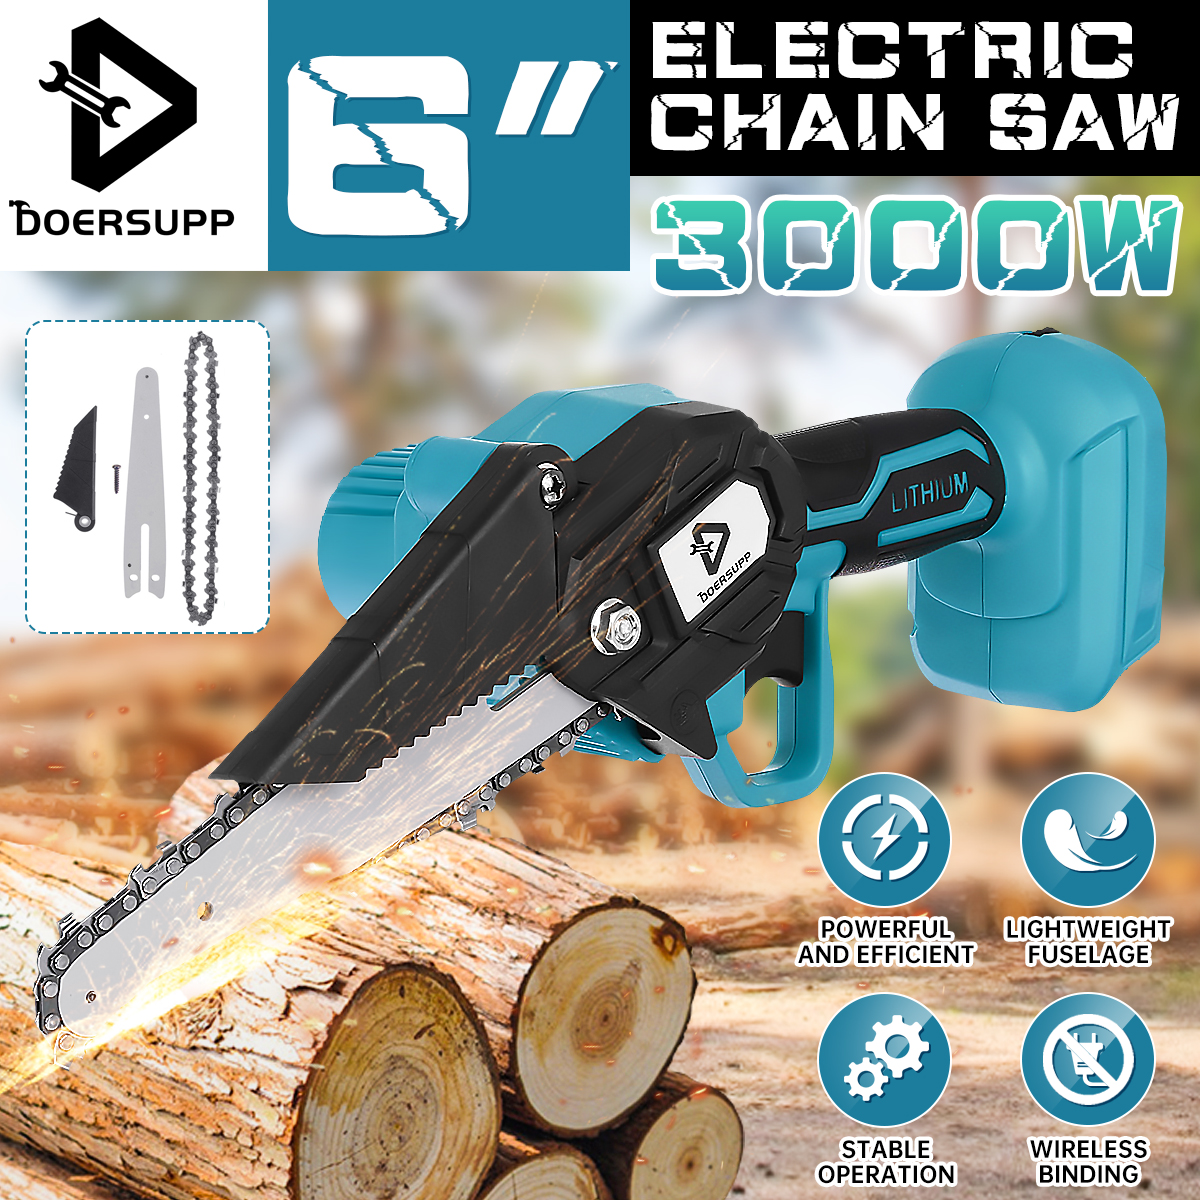 Doersupp-6-Inch-Cordless-Electric-Chain-Saw-Chainsaw-3000W-Mini-Woodworking-Wood-Cutter-One-Hand-Saw-1847597-1